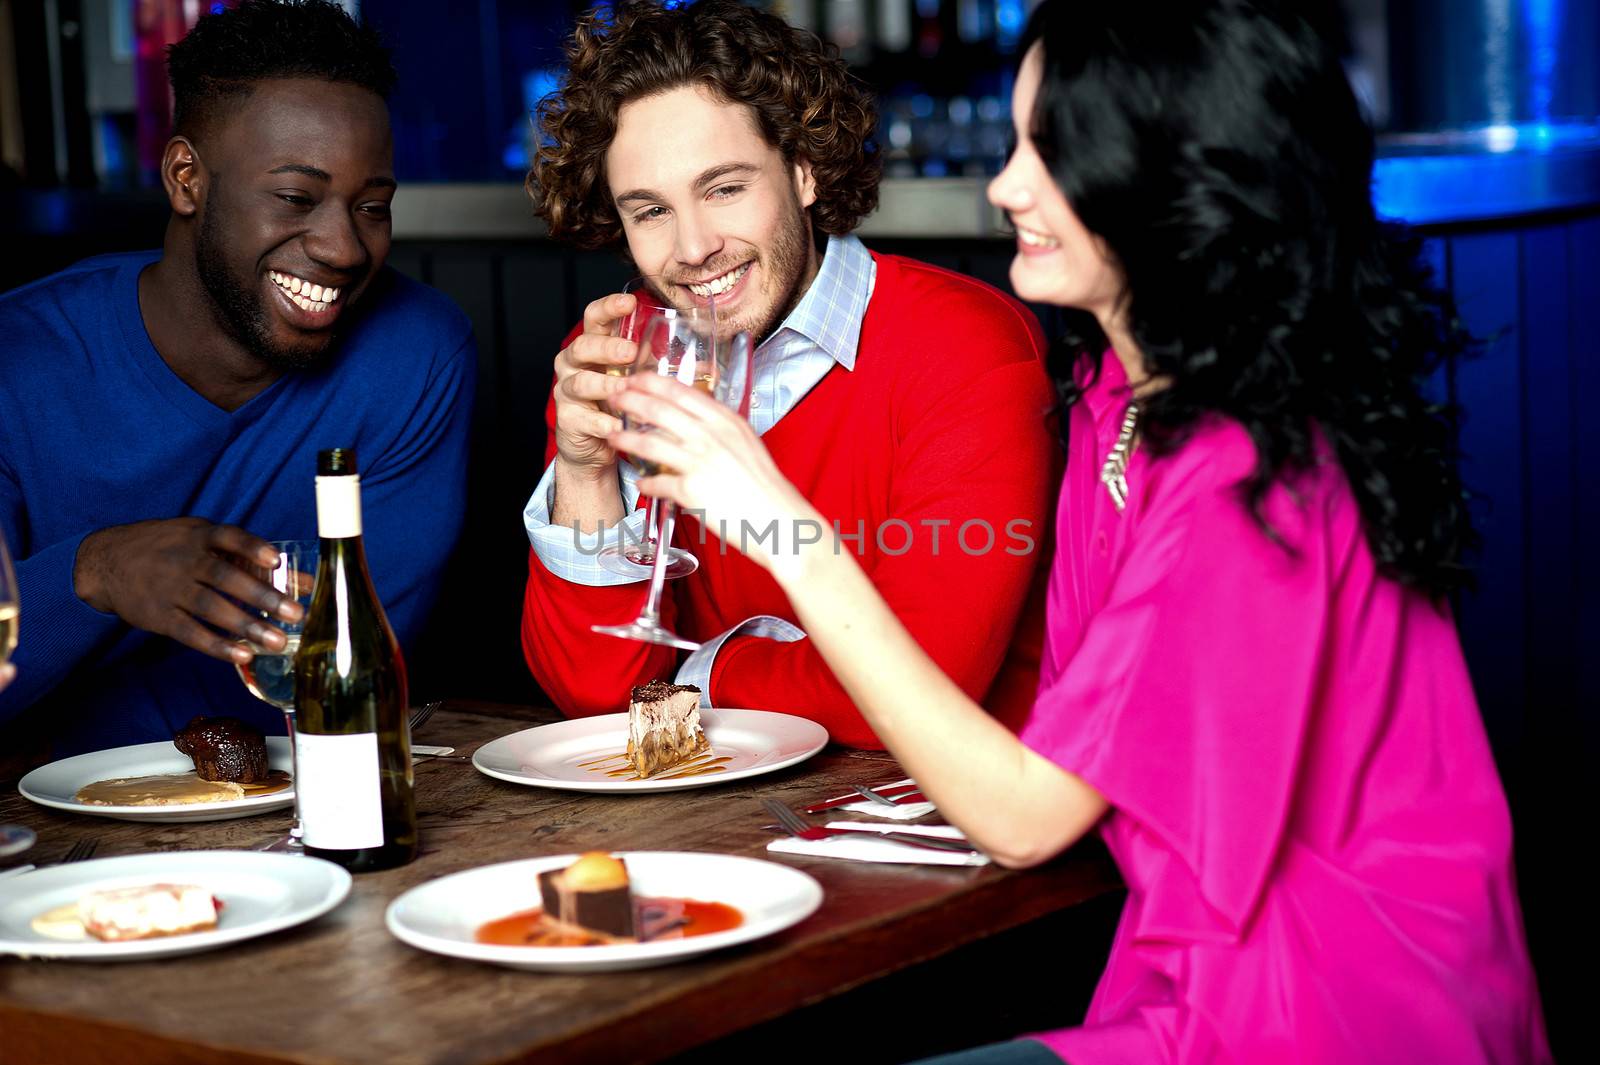 Friends enjoying dinner at restaurant by stockyimages